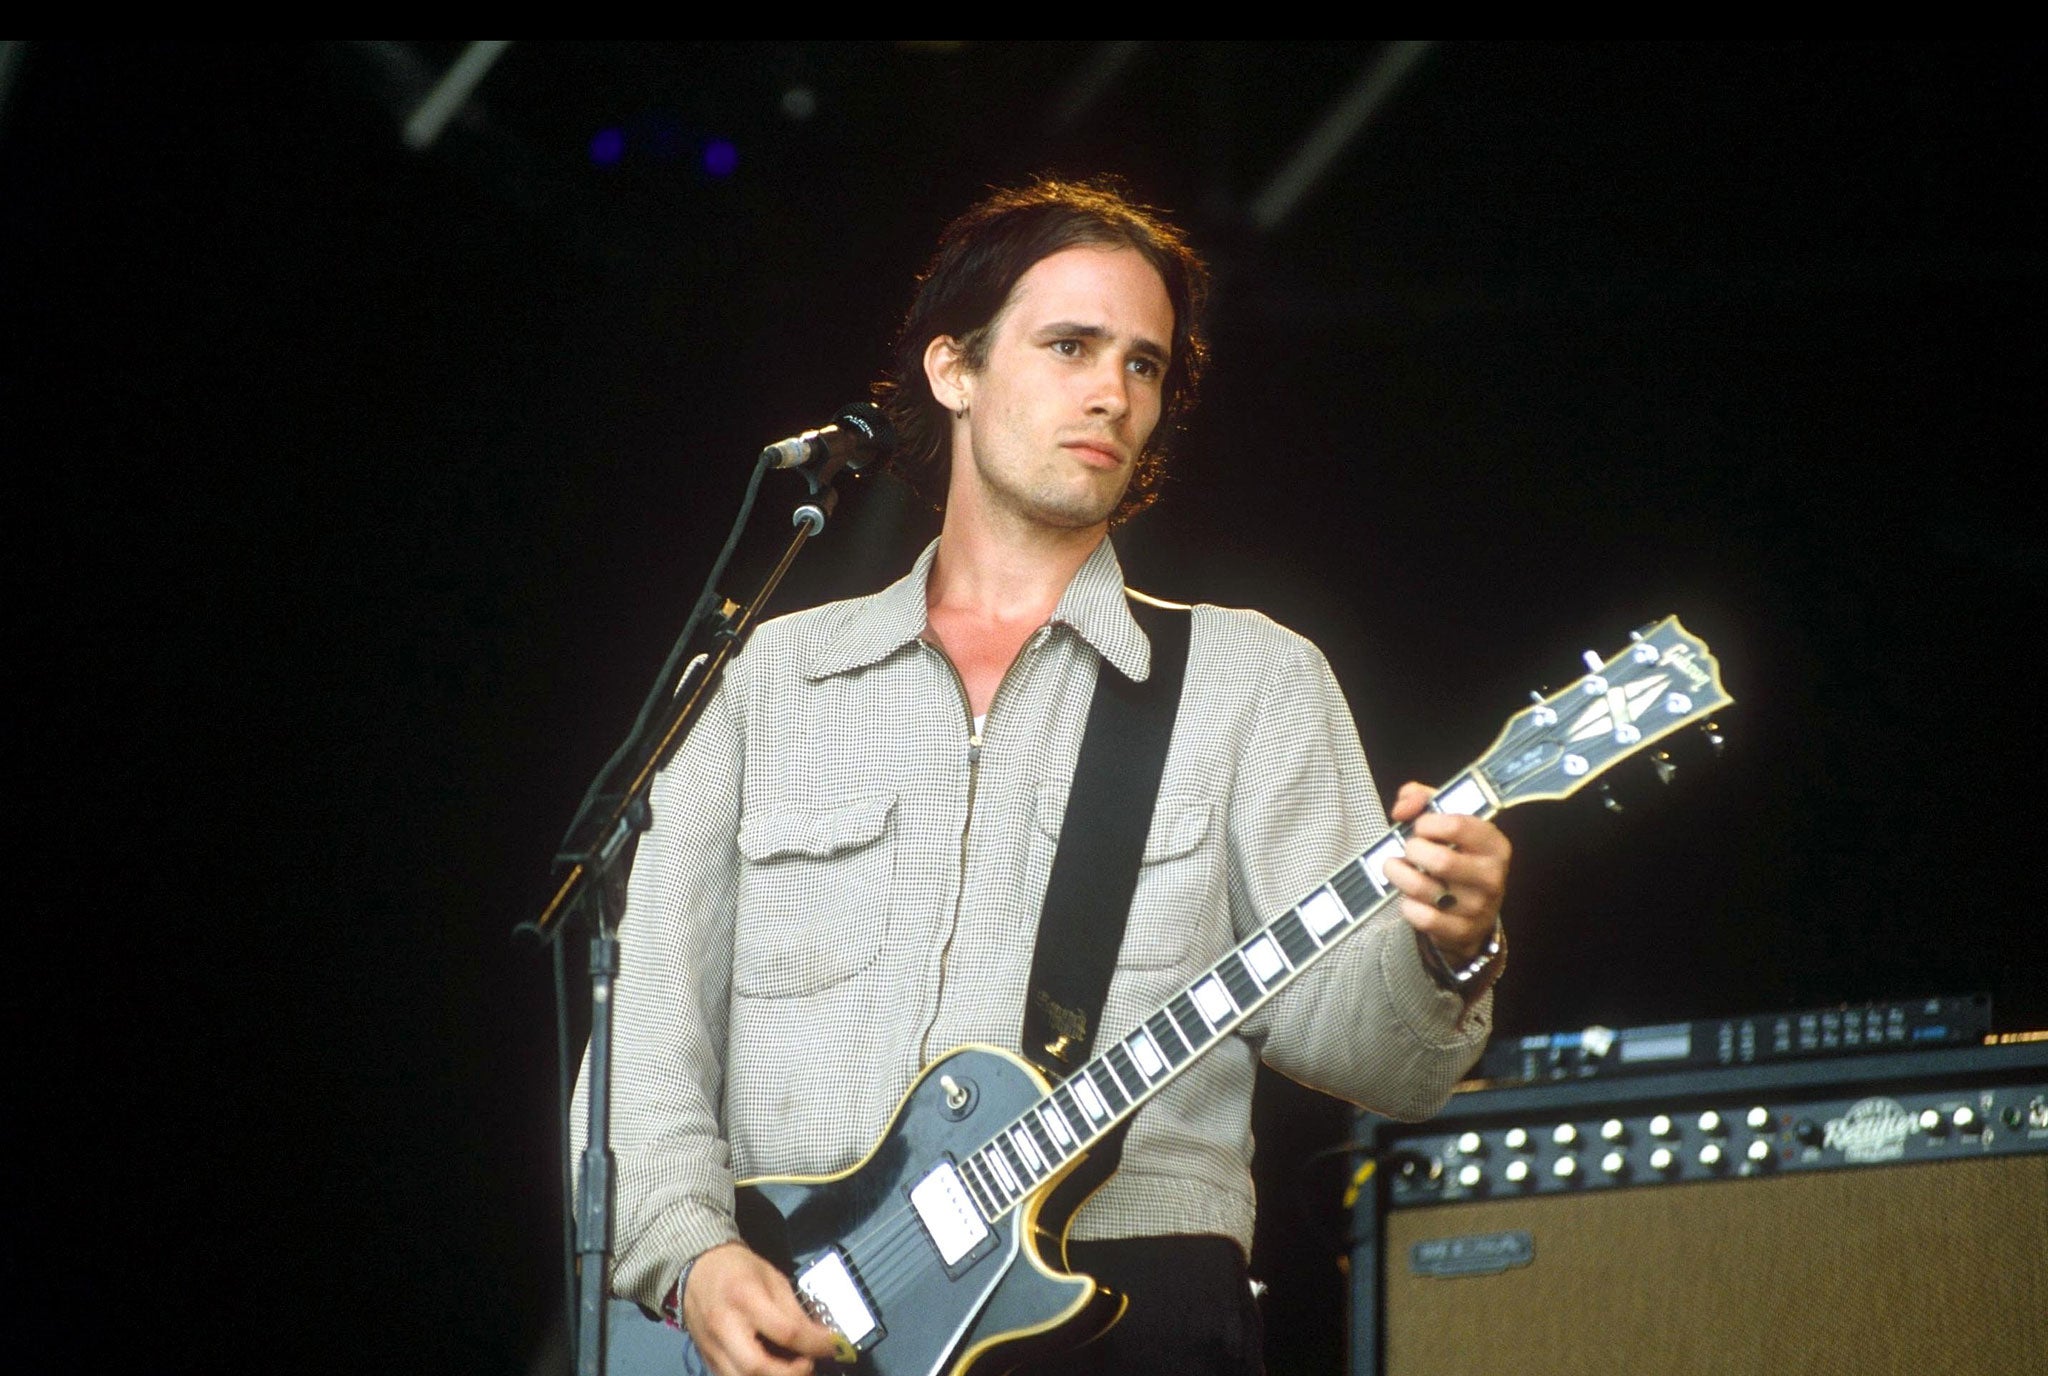 Buckley on stage at Glastonbury in 1995